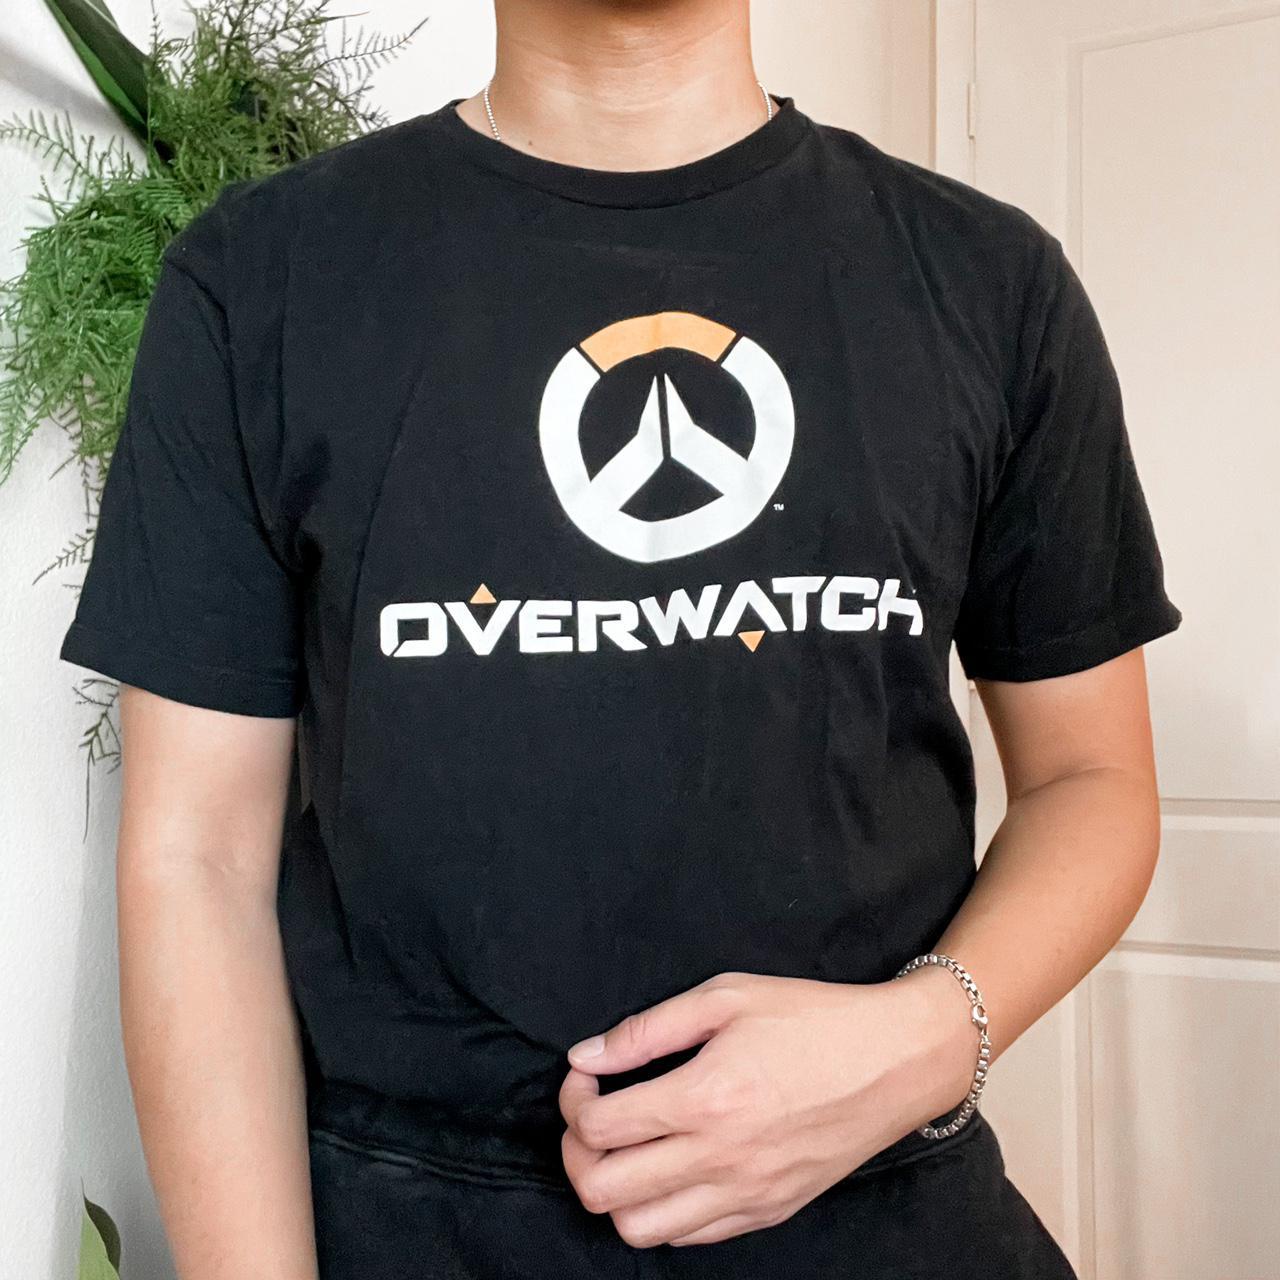 Product Image 1 - Black Overwatch Shirt

💀 Defects &